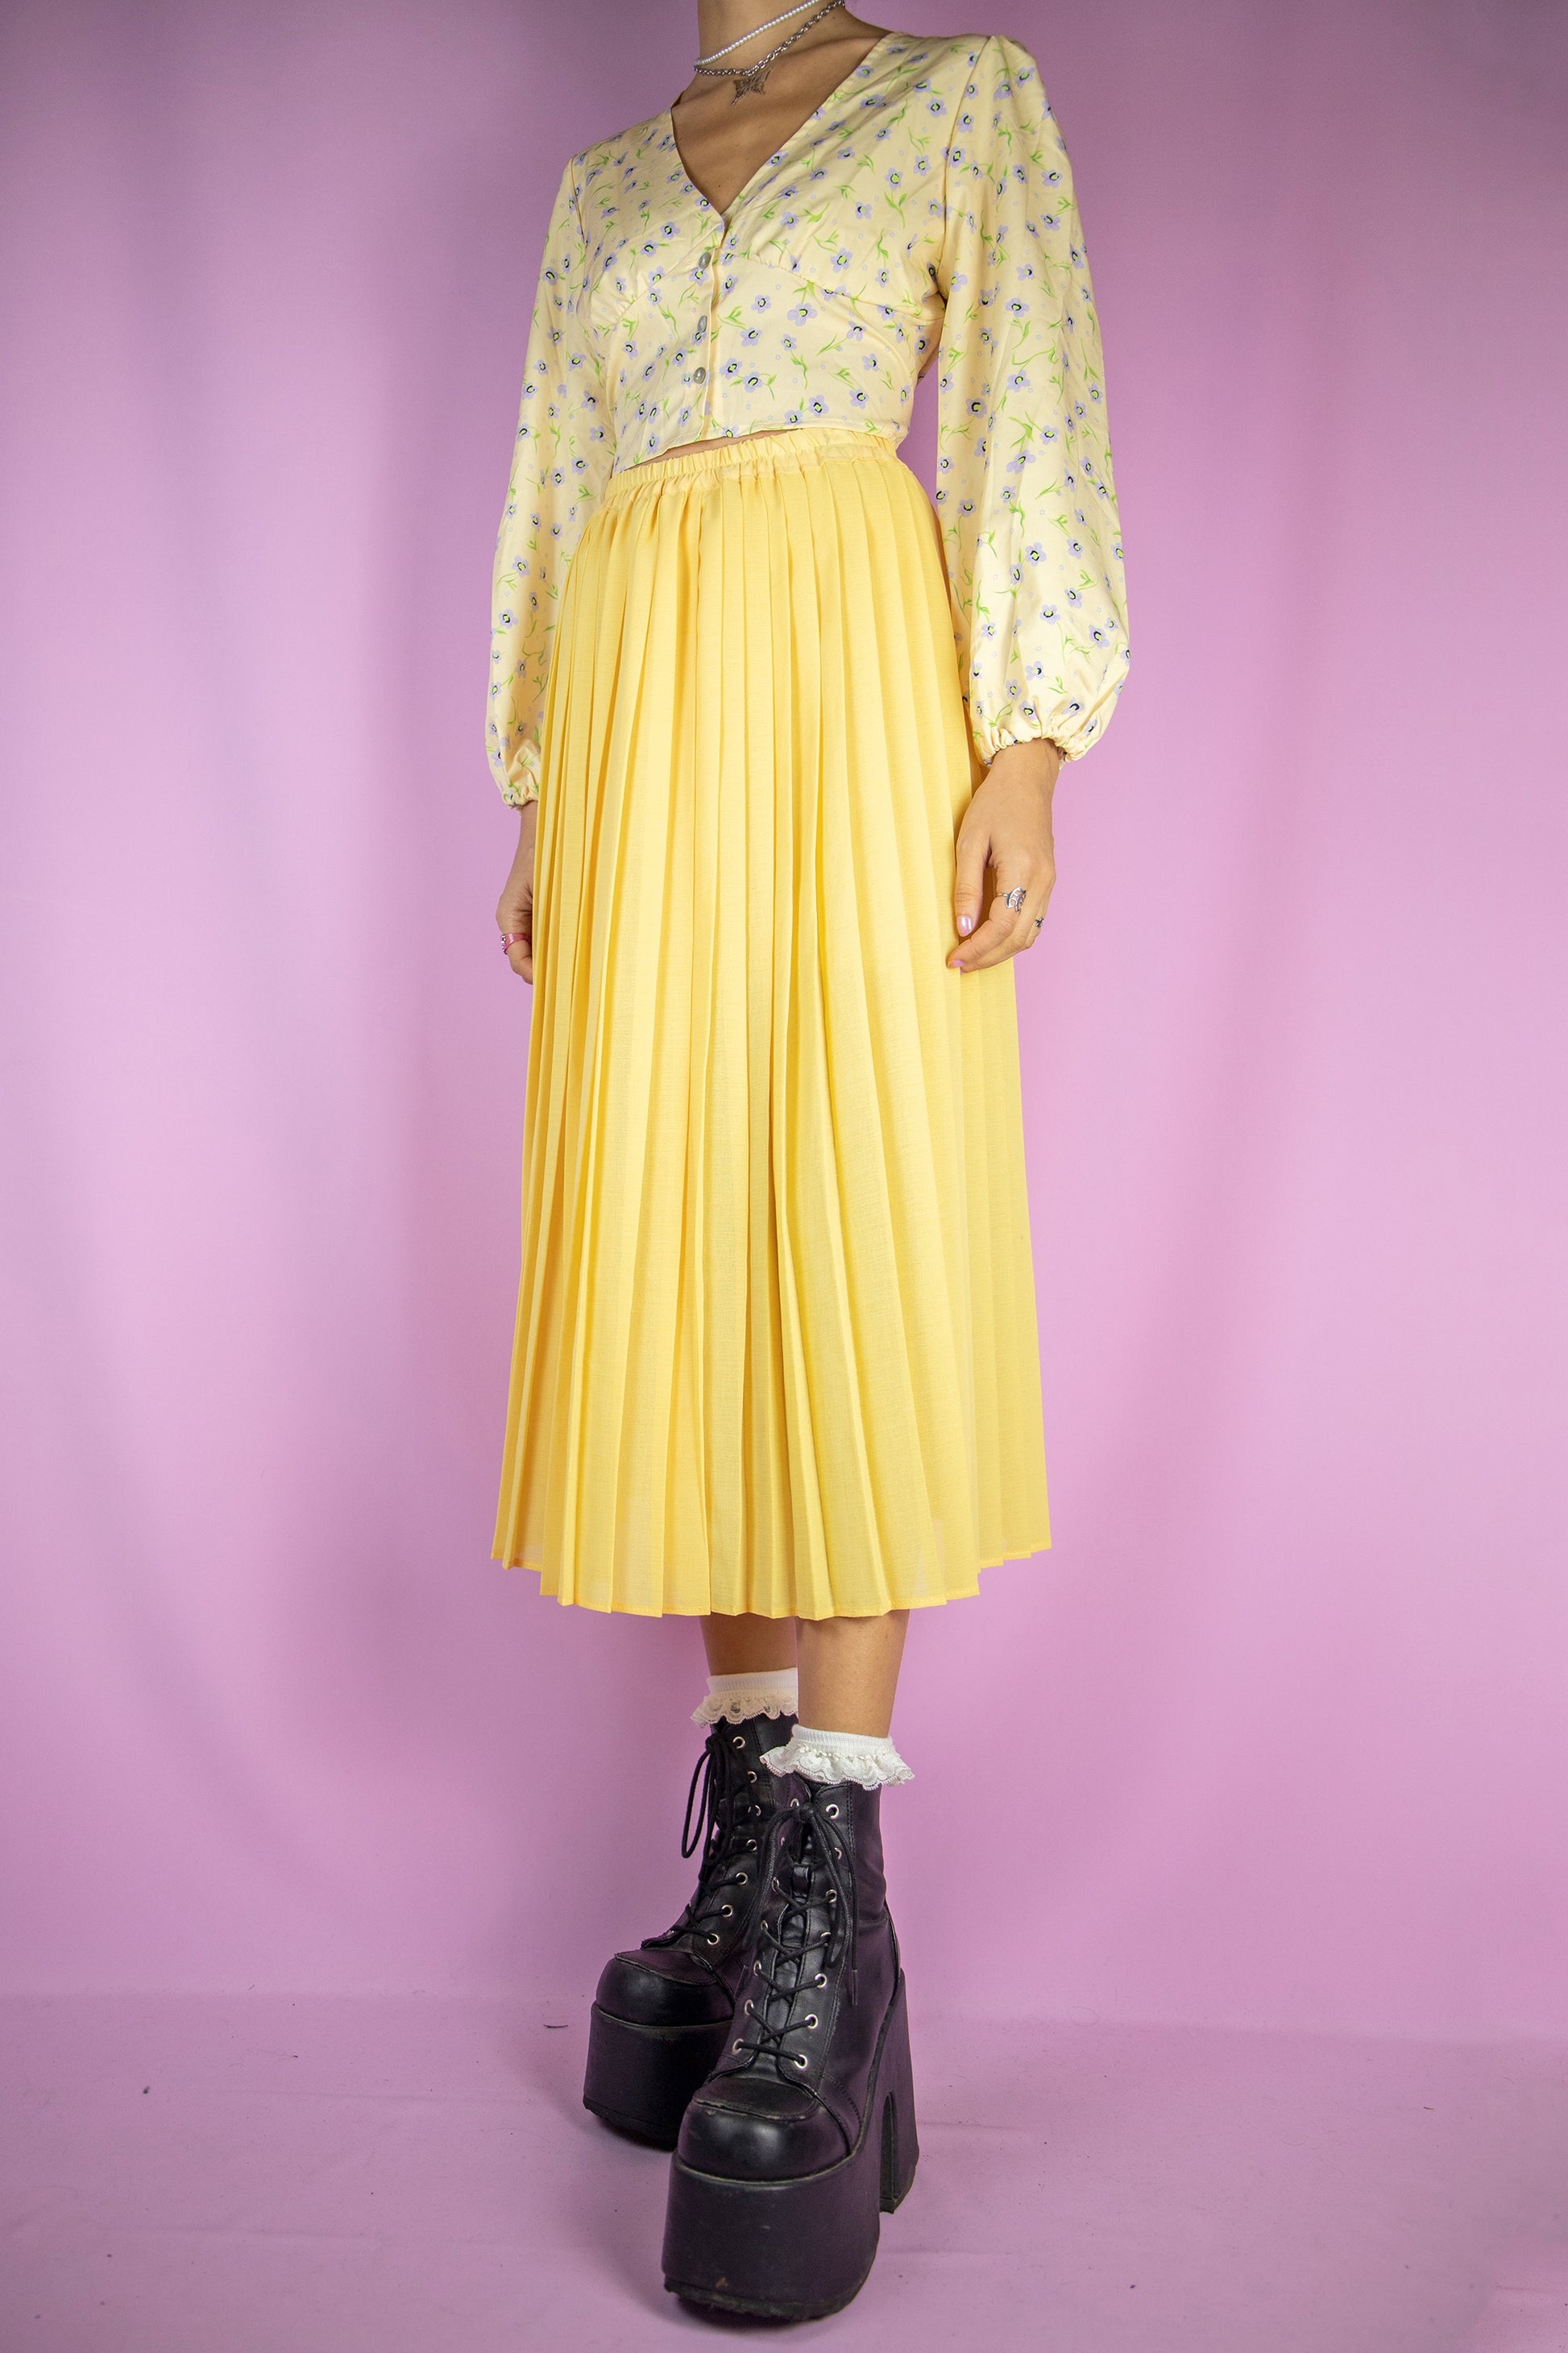 The Vintage 90s Yellow Pleated Midi Skirt is a long pleated yellow skirt with an elasticated waist. Lovely classic preppy 1990s. maxi skirt.